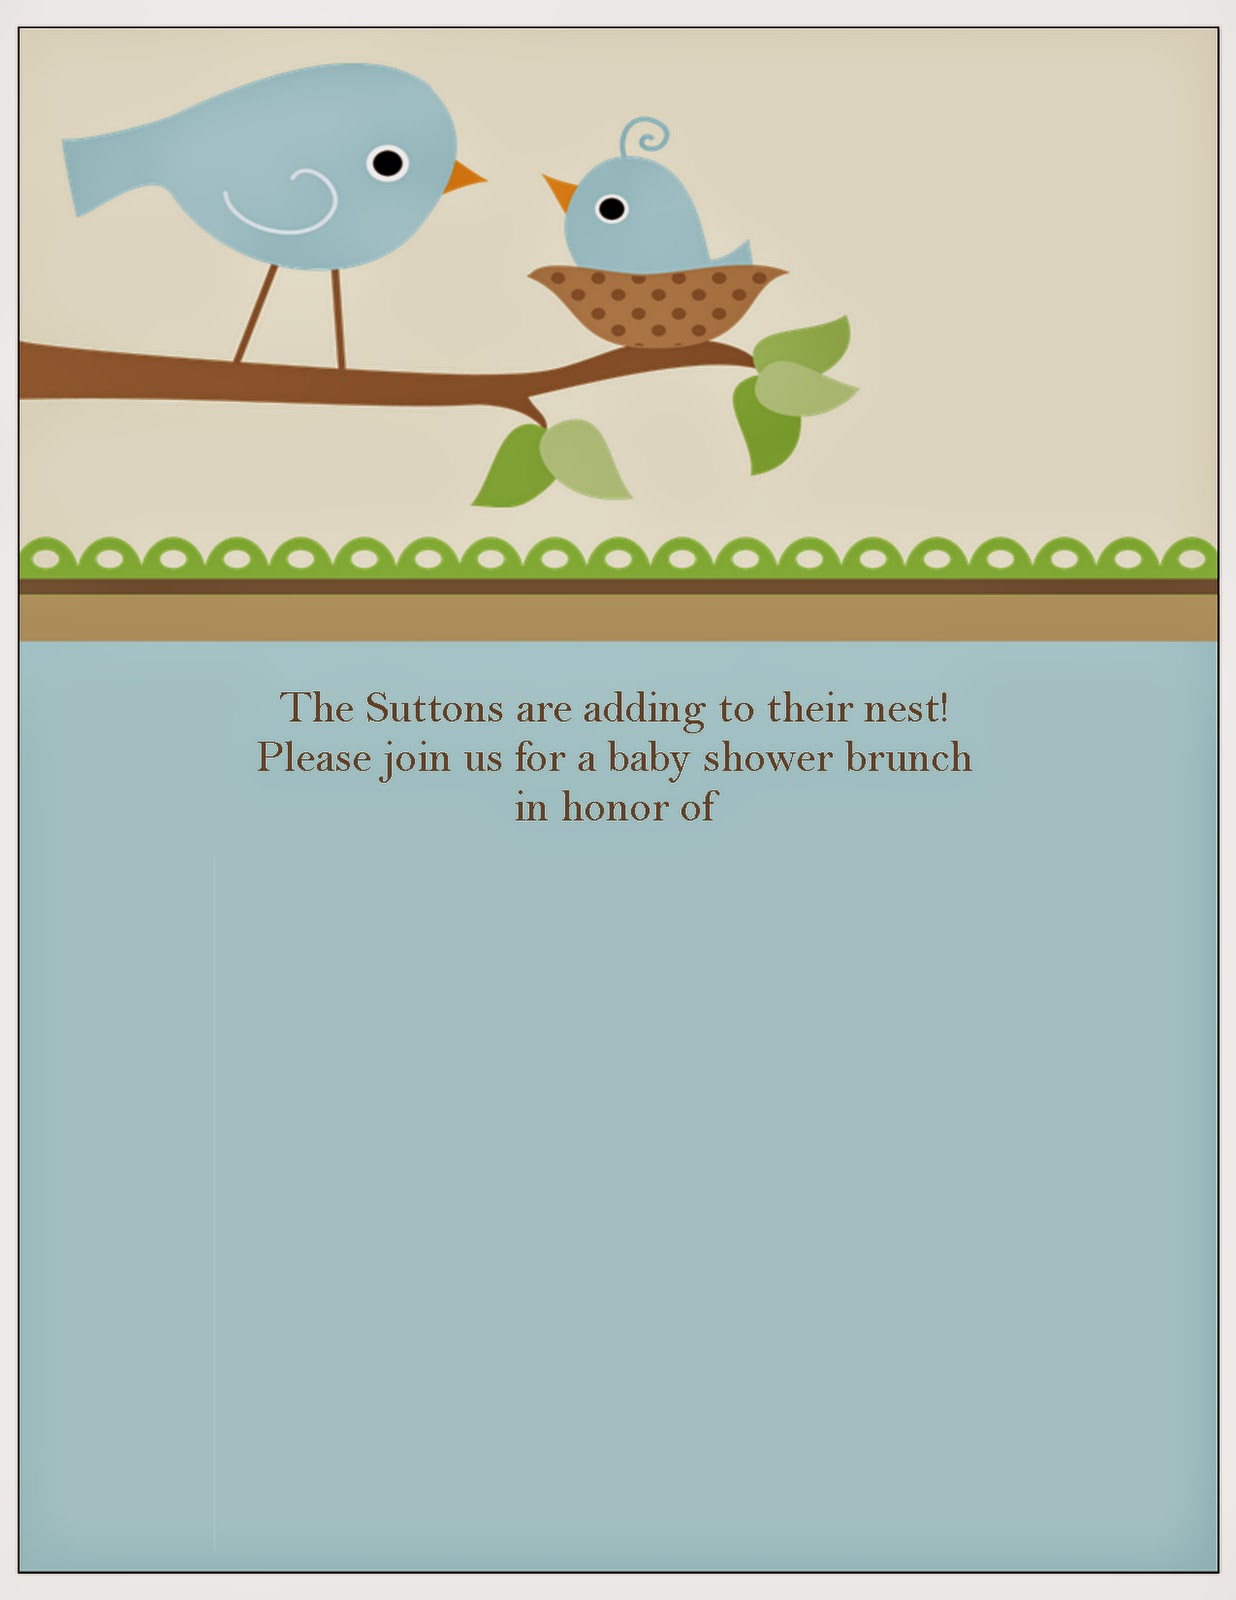 baby shower clipart for invitations - photo #11